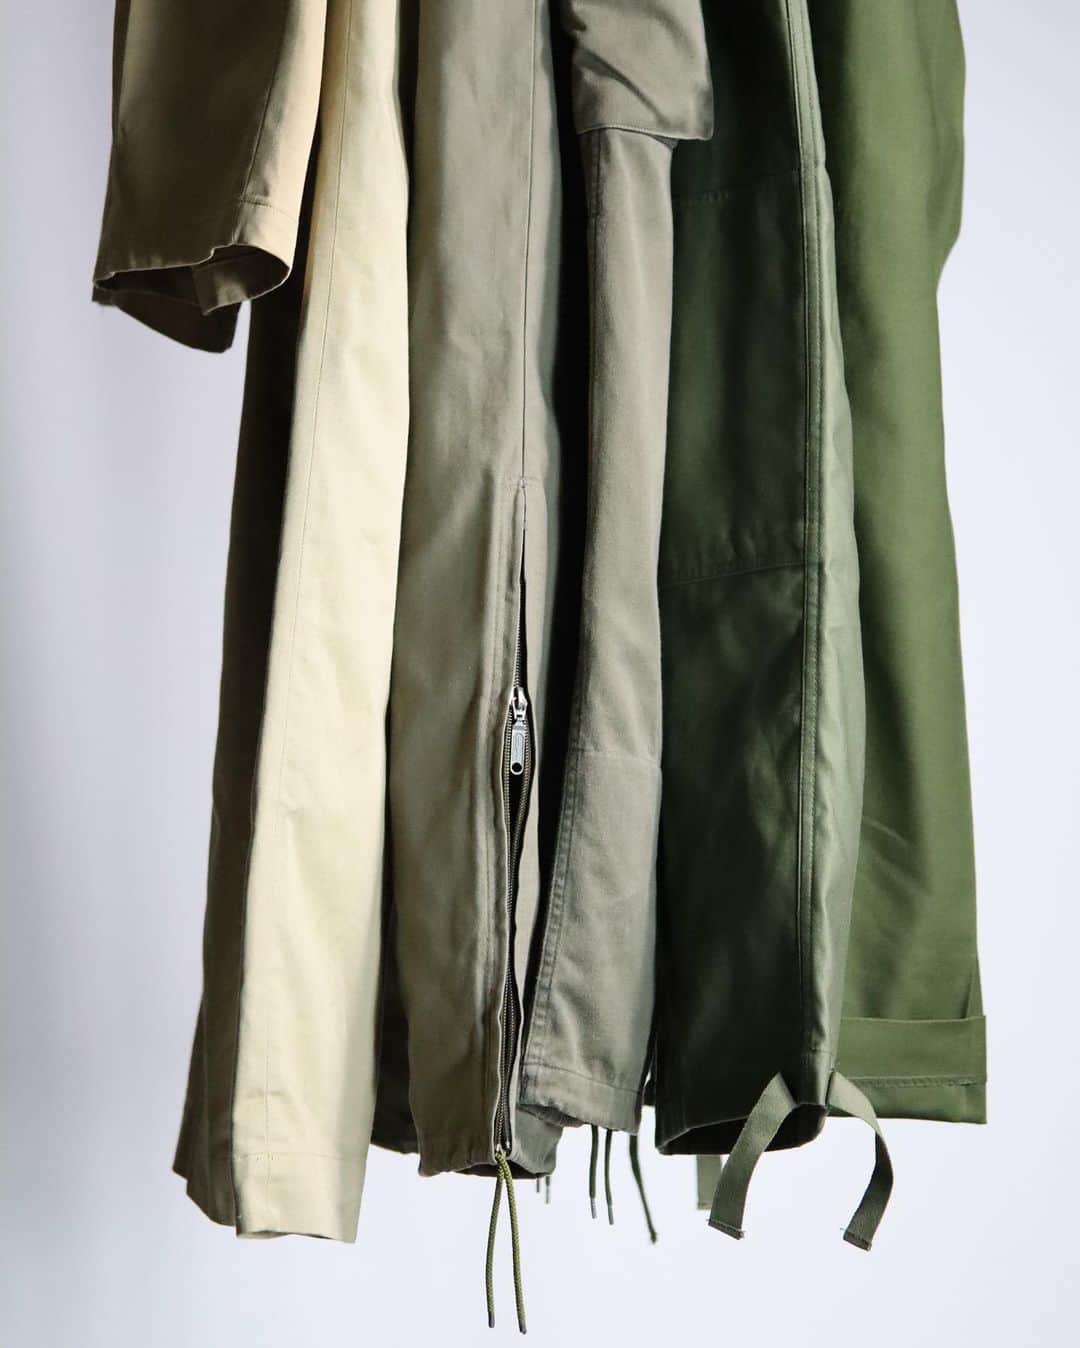 DoLuKEのインスタグラム：「Pick Up Miltary Pants → ONLINE STORE﻿ ﻿ ﻿ ﻿ ﻿ ・1950's US.ARMY 2tuck Chino Shorts /Dead stock﻿ ﻿ ・1960's US.ARMY Chino Trousers﻿ ﻿ ・SWIS ARMY Mountain Over Pants﻿ ﻿ ・1980's French AirForce M-64 Field Pants﻿ ﻿ ・1990's Belgium ARMY M-88 Field Over Pants﻿ ﻿ ・1980's Swedish ARMY Utility Trousers﻿ ﻿ ﻿ 22時掲載﻿ ﻿ ﻿ #DoLuKE」